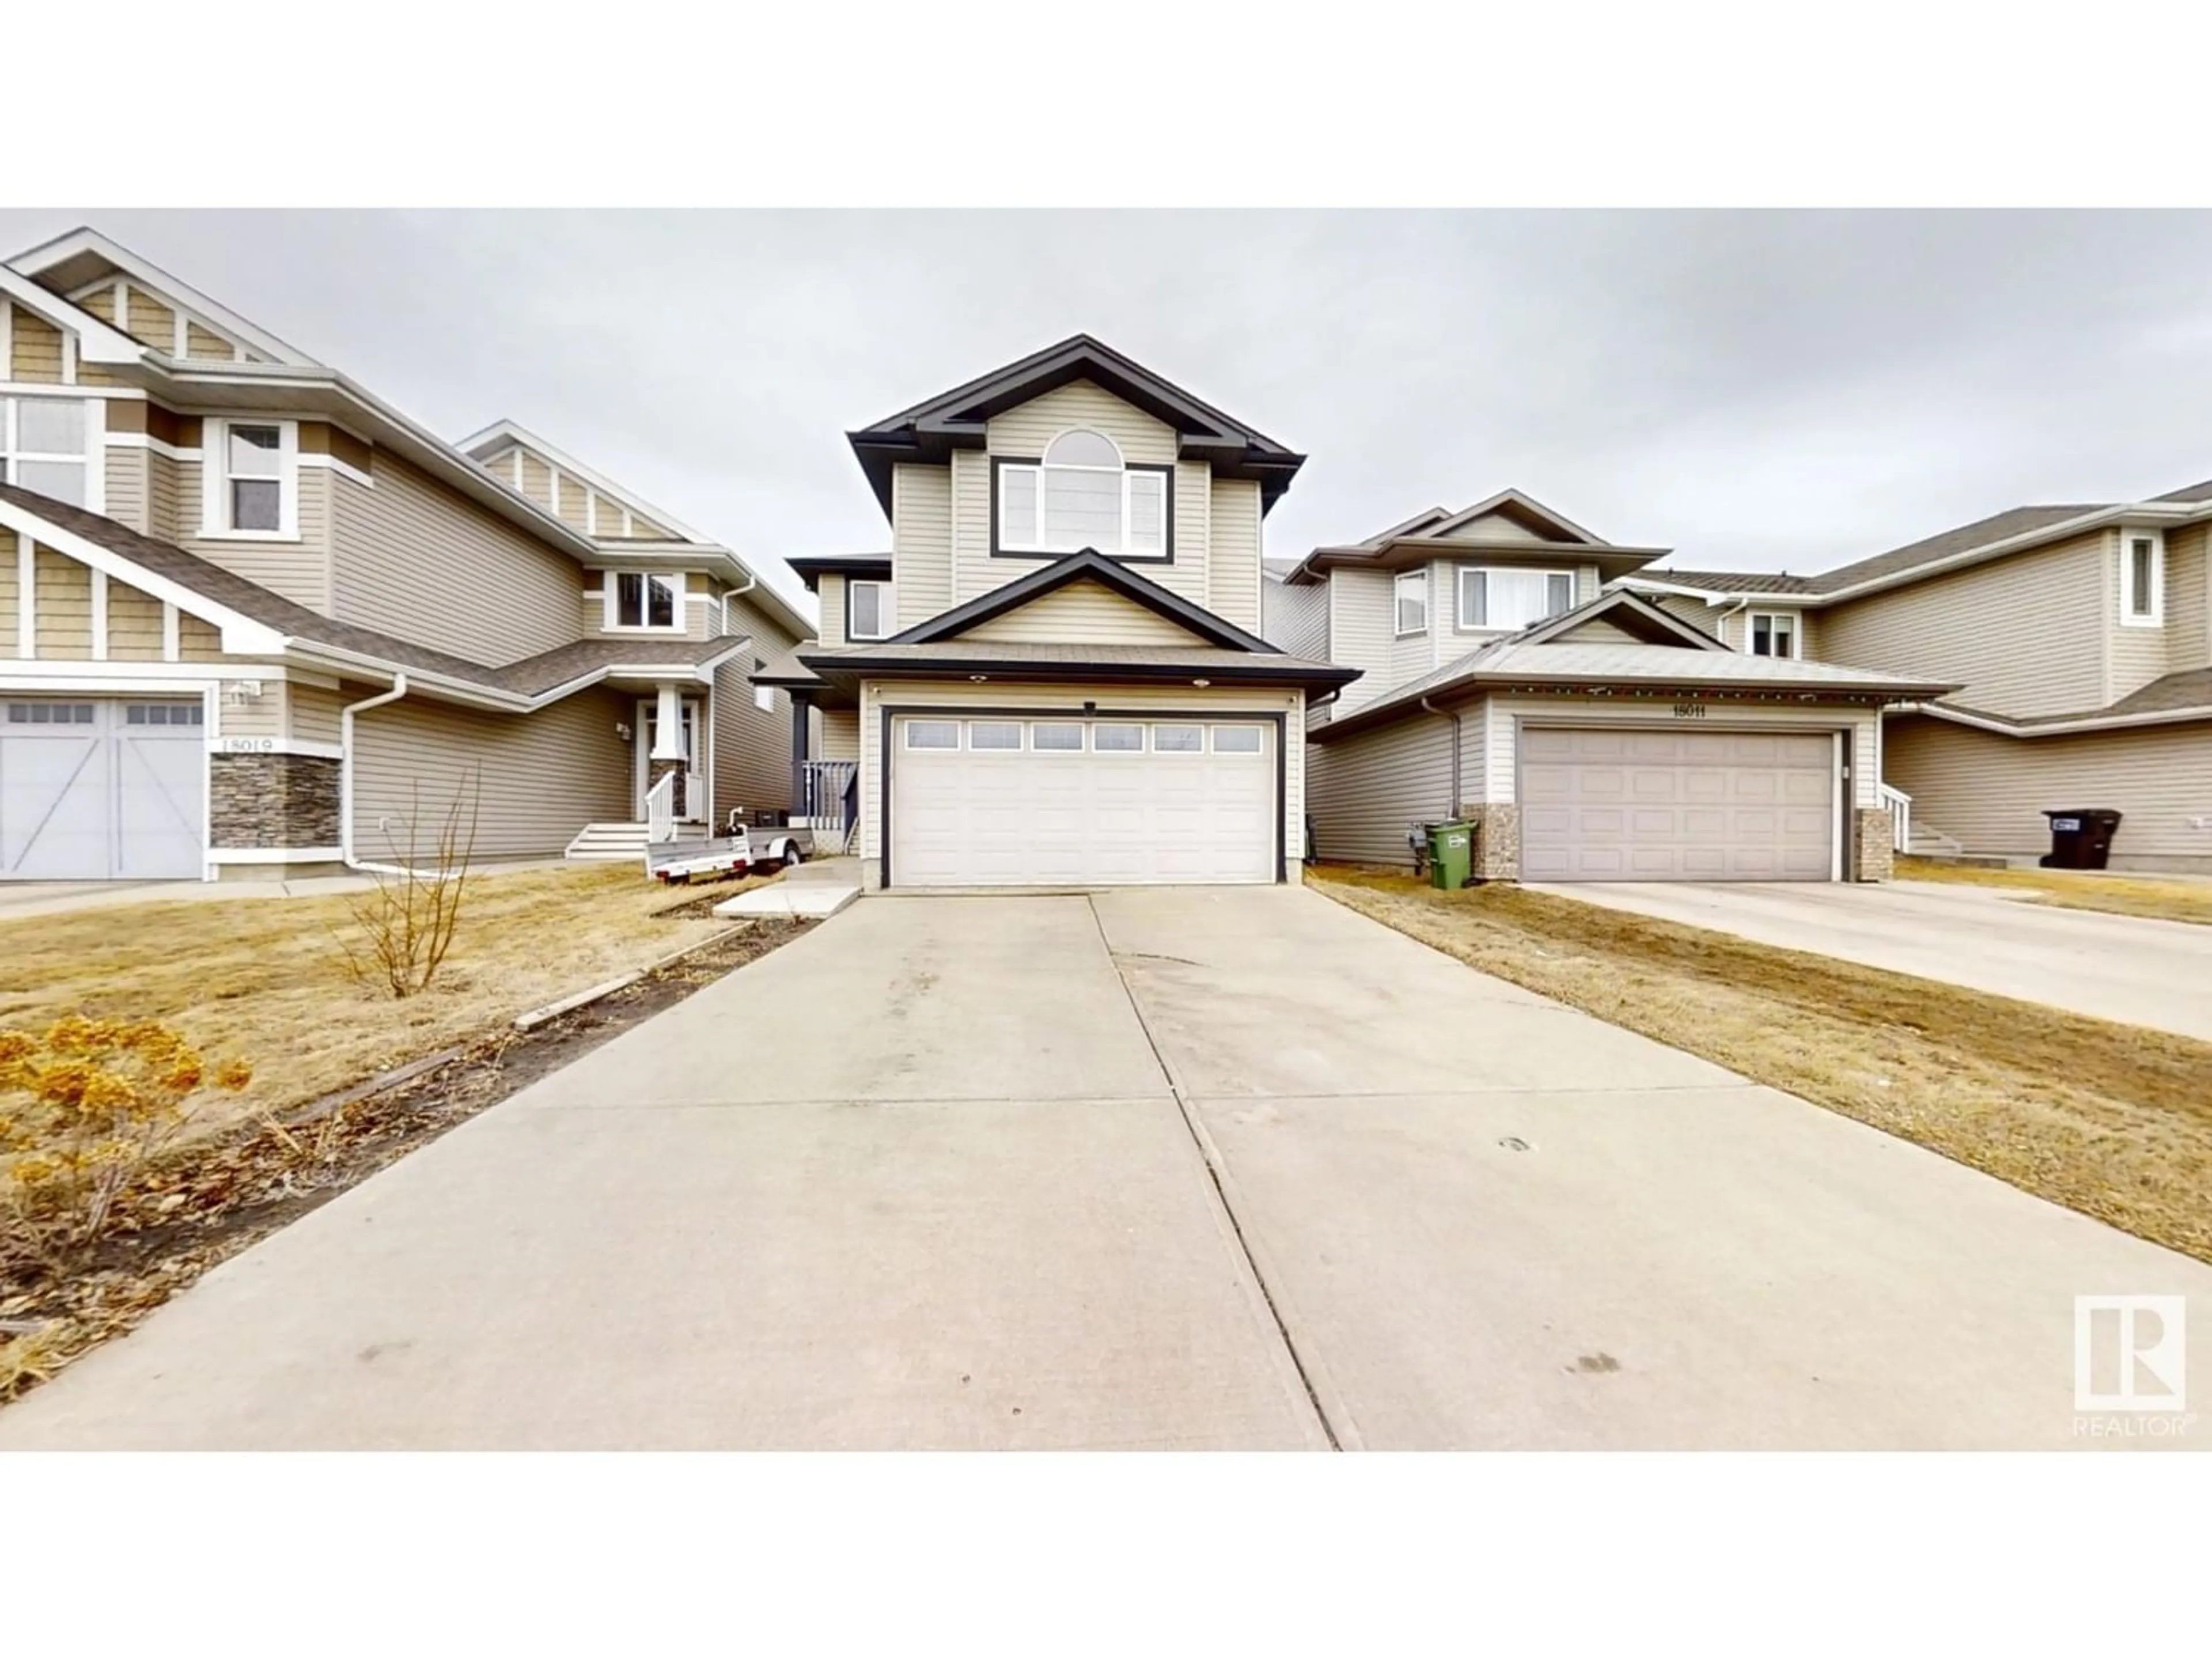 A pic from exterior of the house or condo for 18015 87 ST NW, Edmonton Alberta T5Z0G6